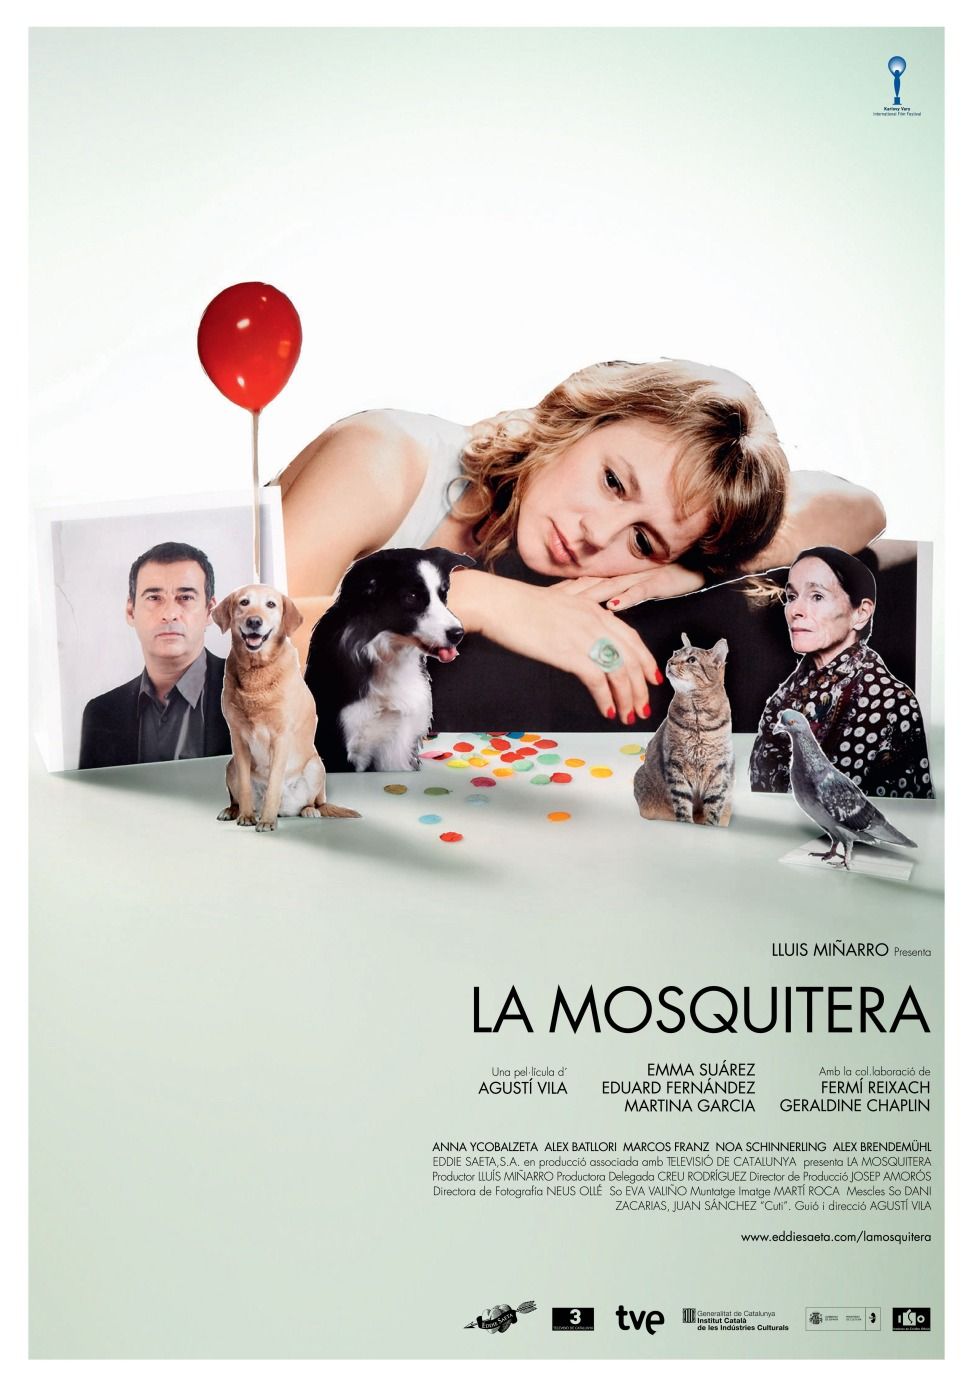 Extra Large Movie Poster Image for La mosquitera 